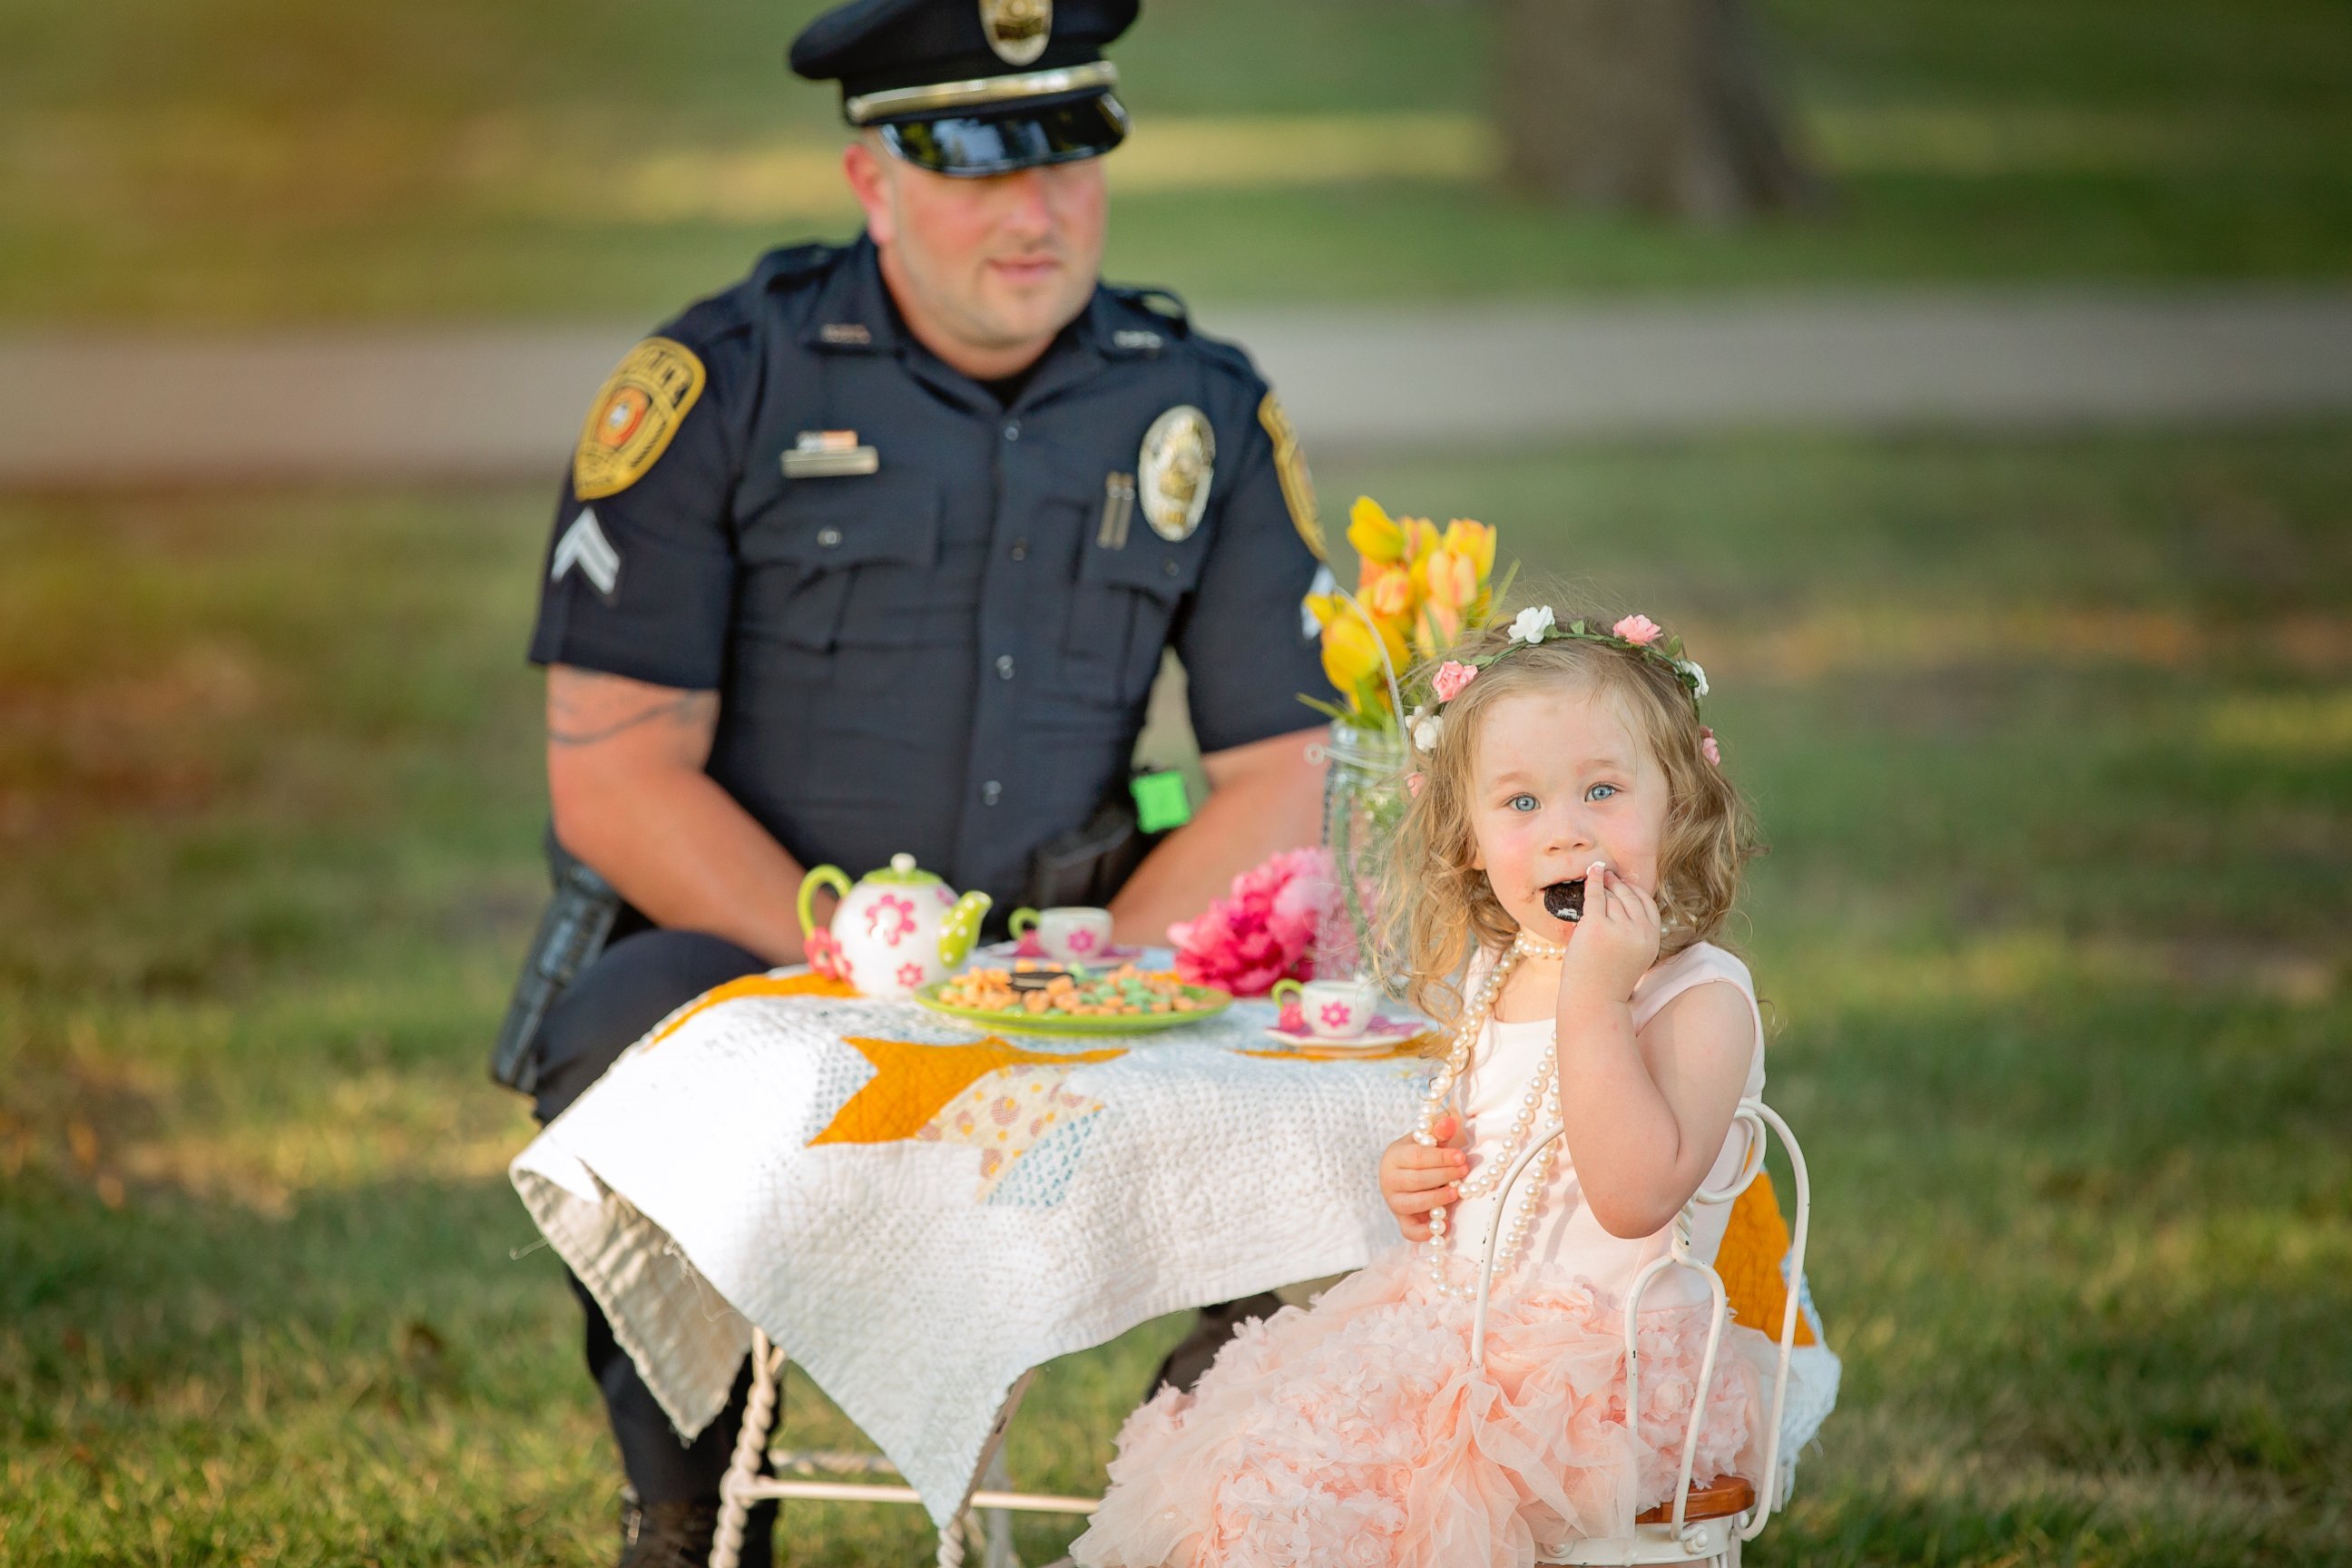 476b1ec0-5586-11e6-8a78-1f25ab43134f_Police-Officer-Has-Tea-Party-With-Toddler-H